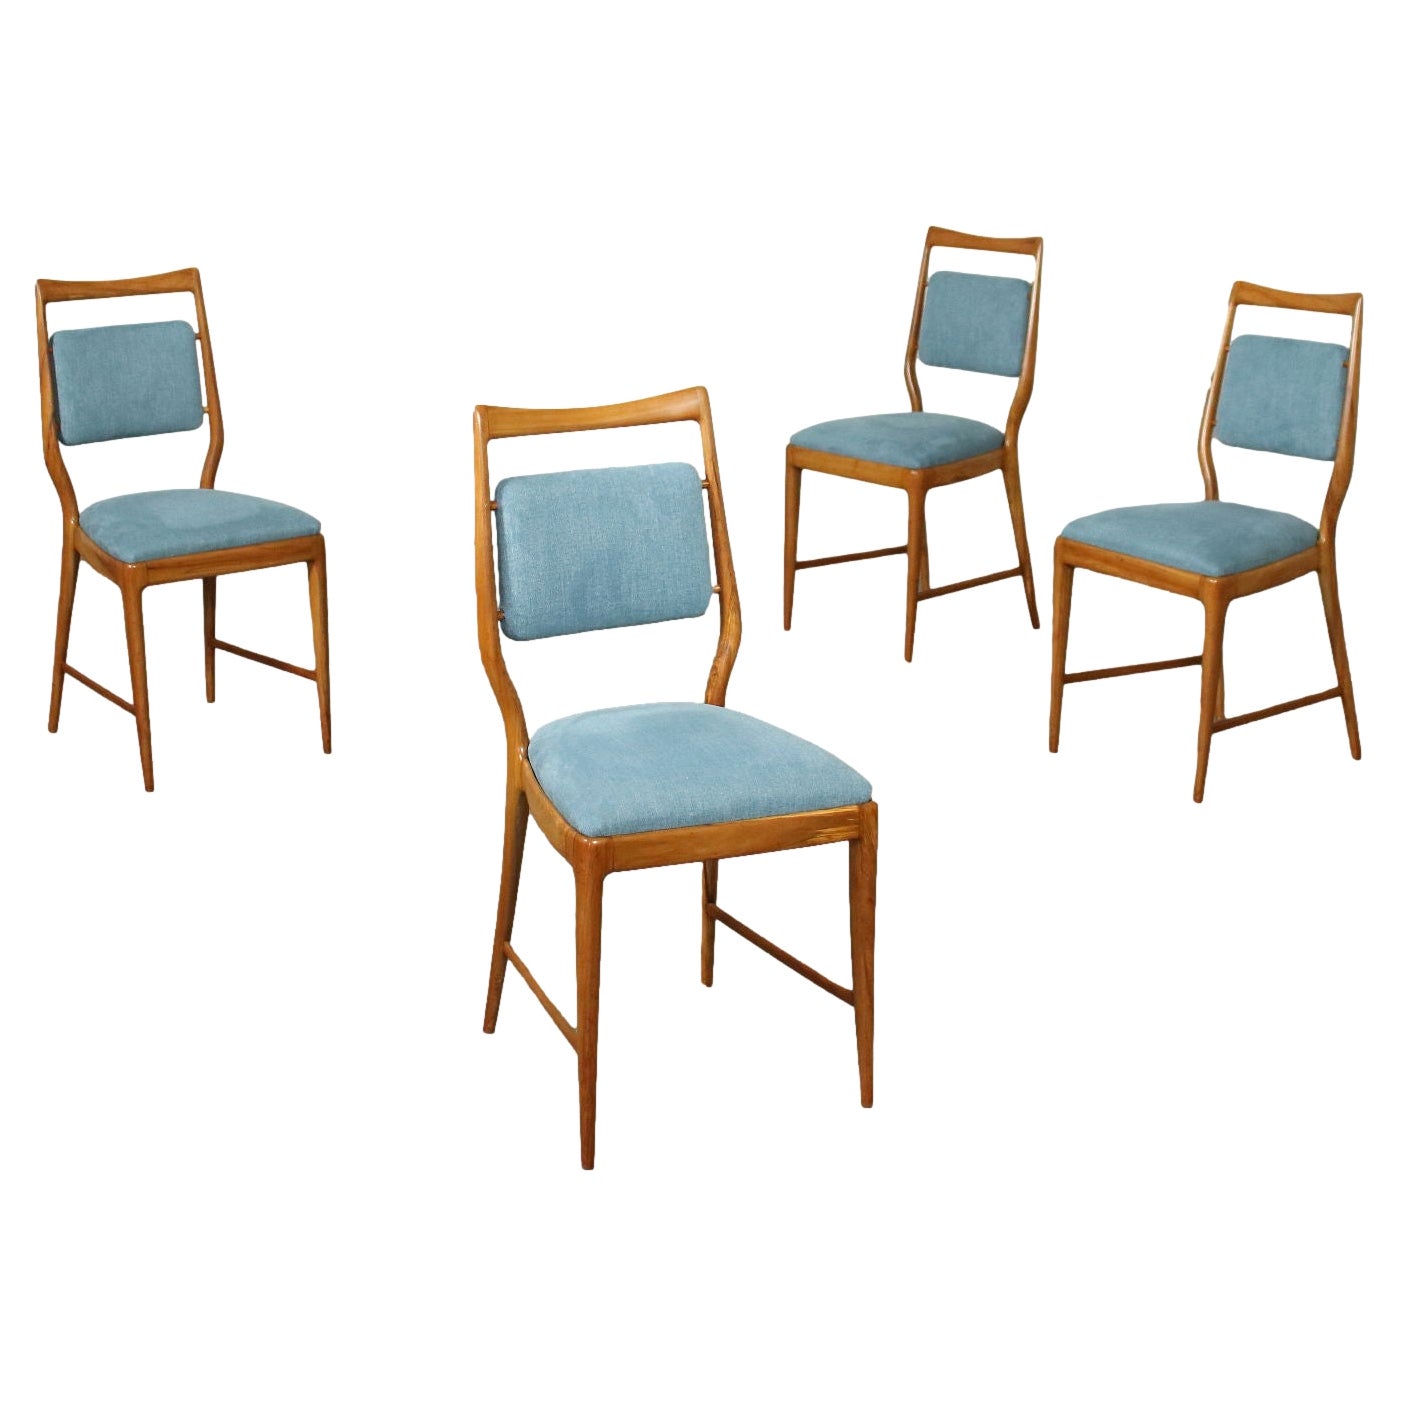 Group of Four Chairs Stained Beech Foam Fabric, 1950s 1960s